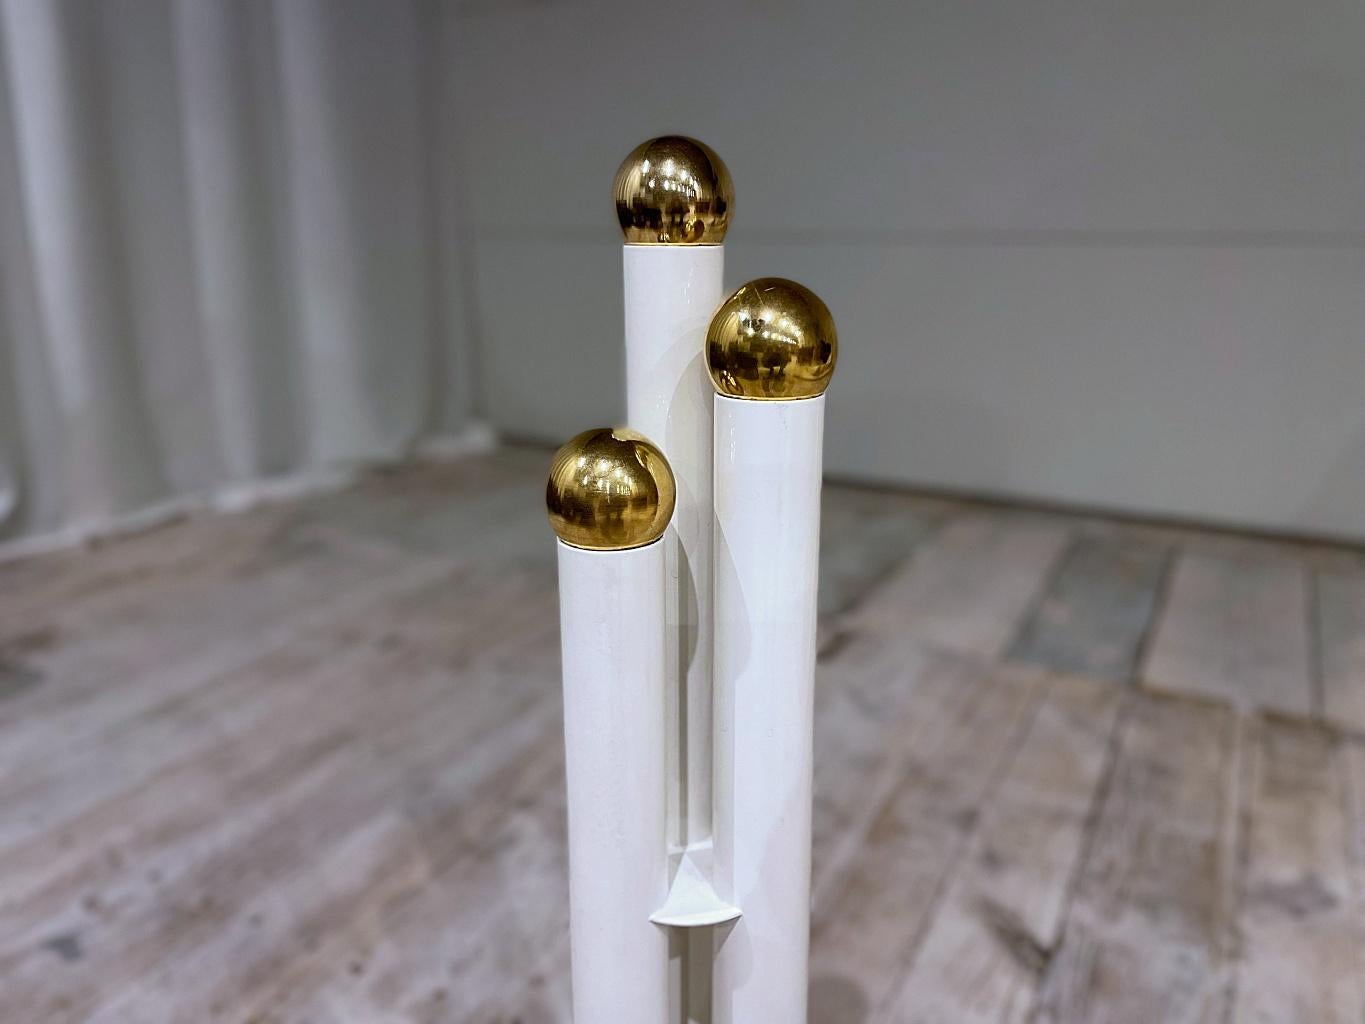 Italian Midcentury Modern Minimalistic Tower Brass & Steel Fireplace Tools, 1960s, Italy For Sale